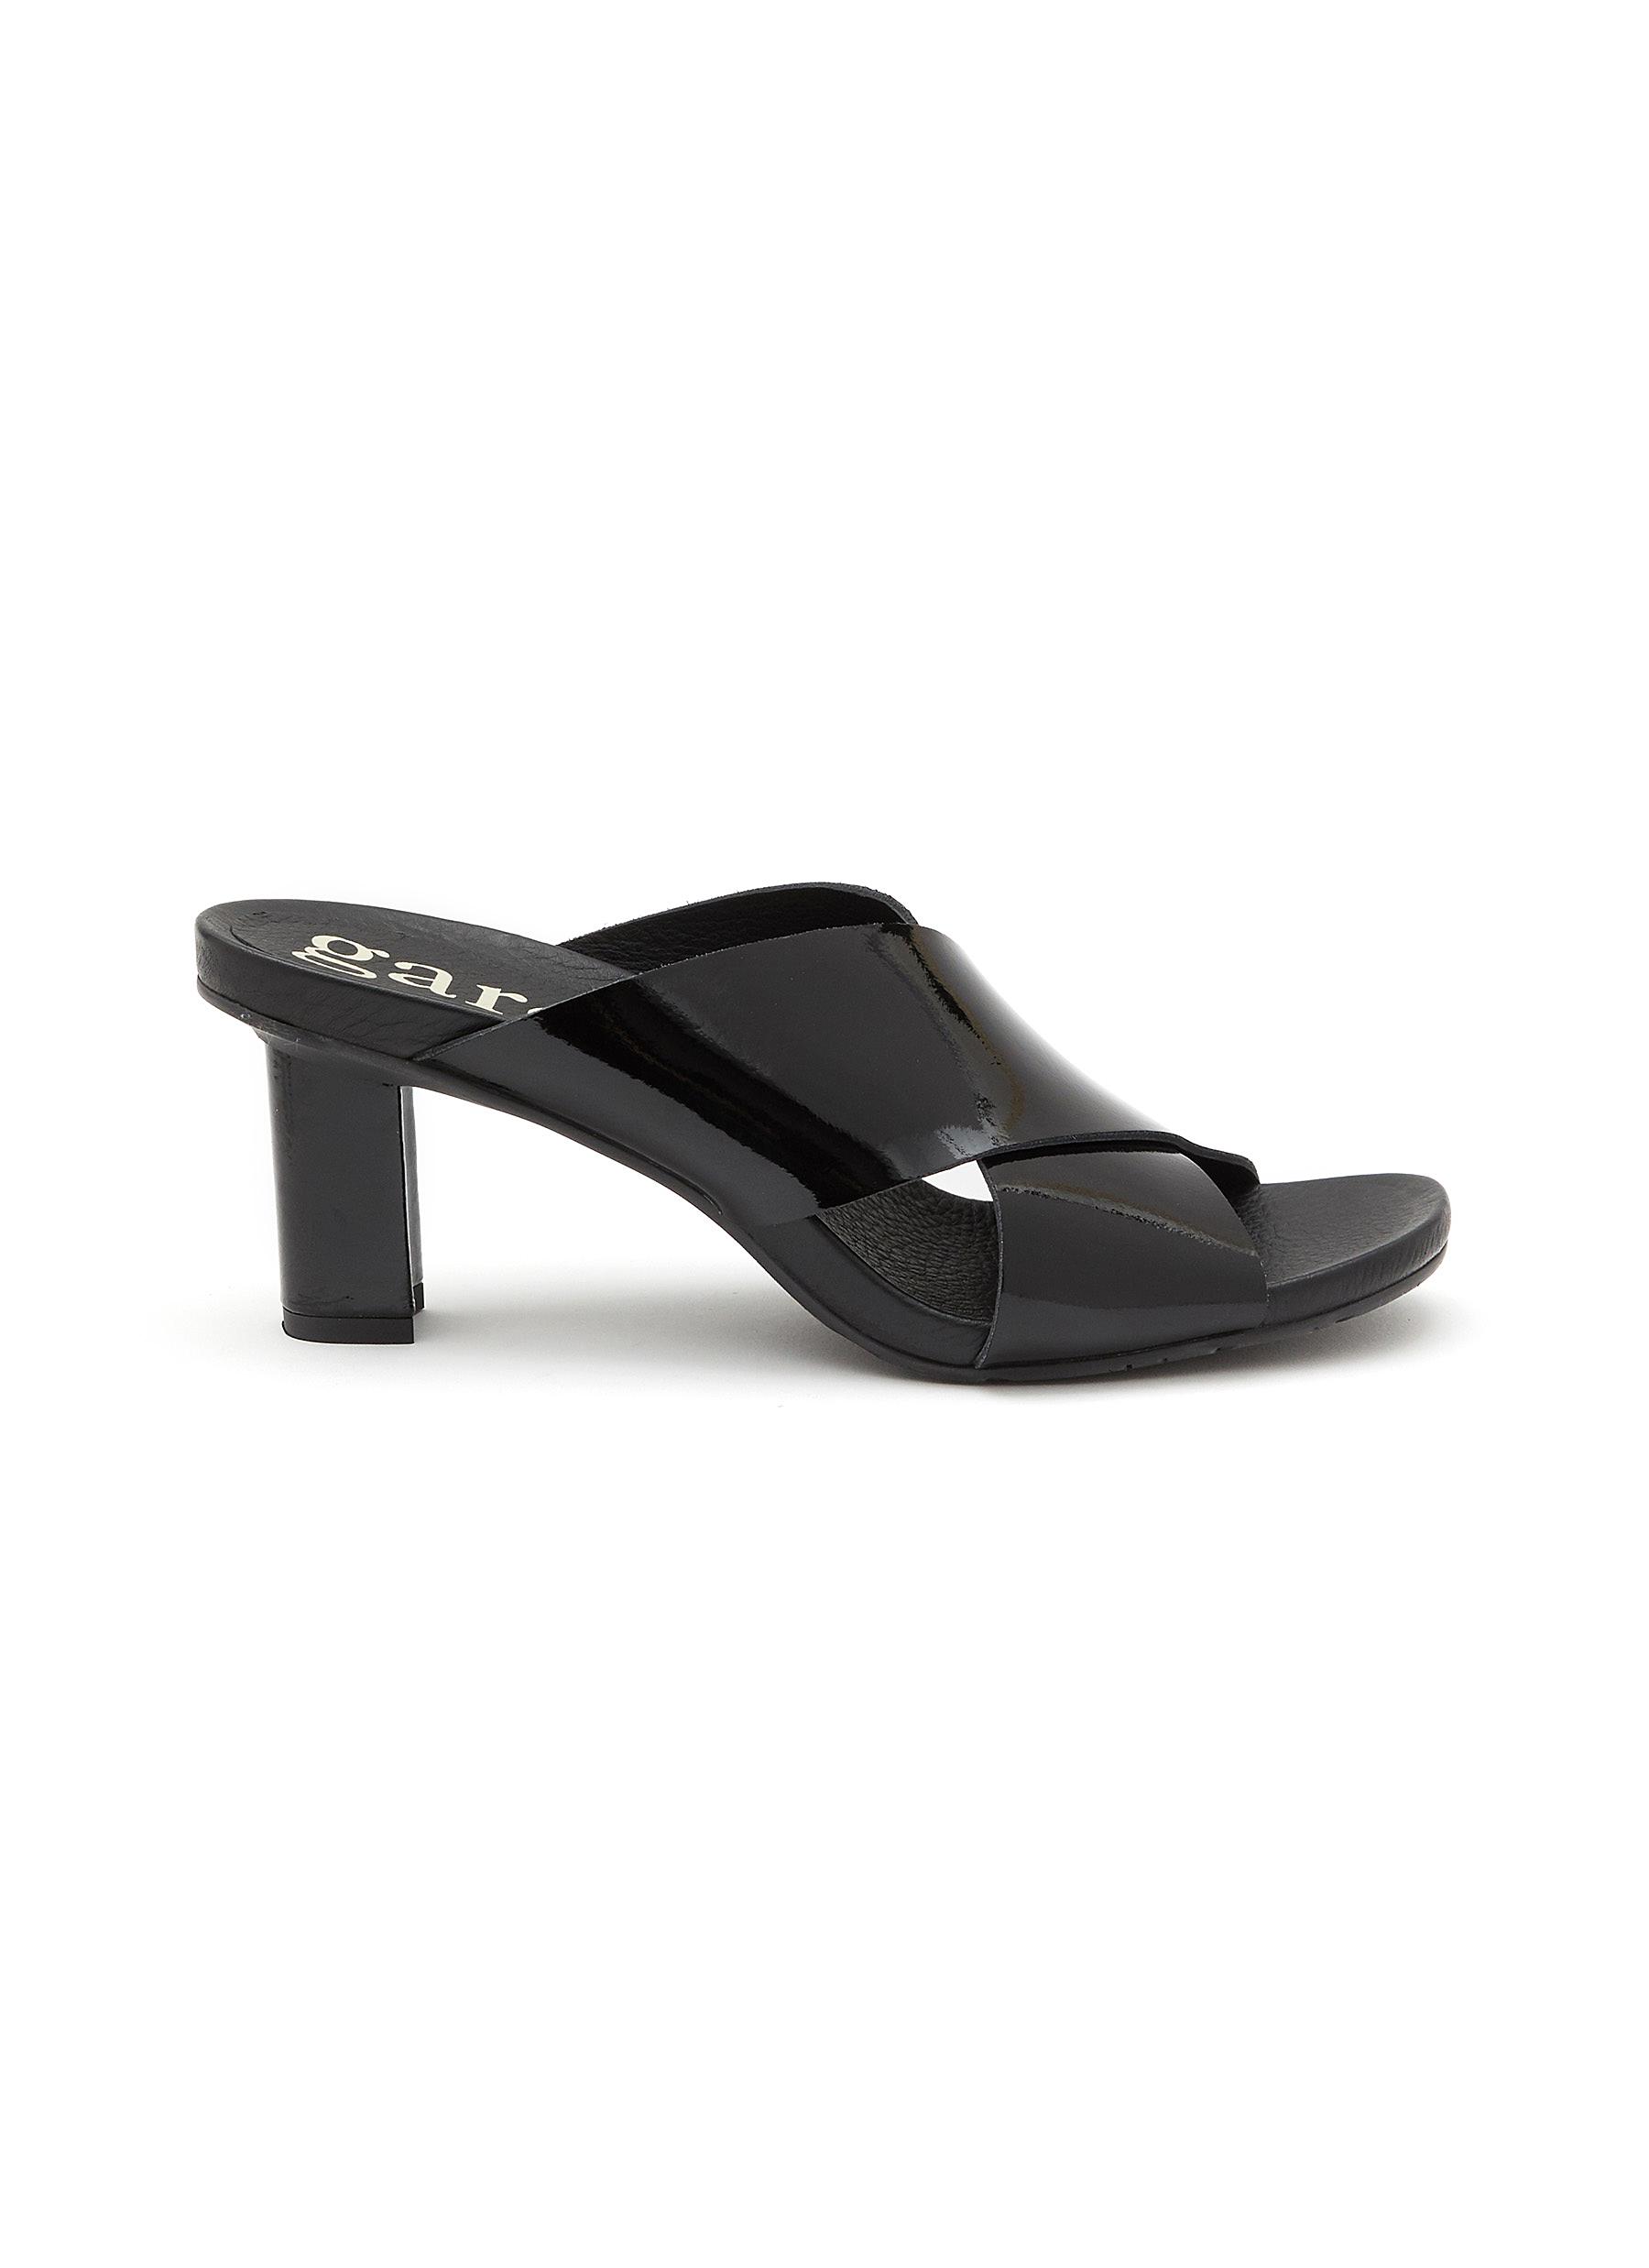 Casidy 65 Criss Cross Patent Leather Sandals